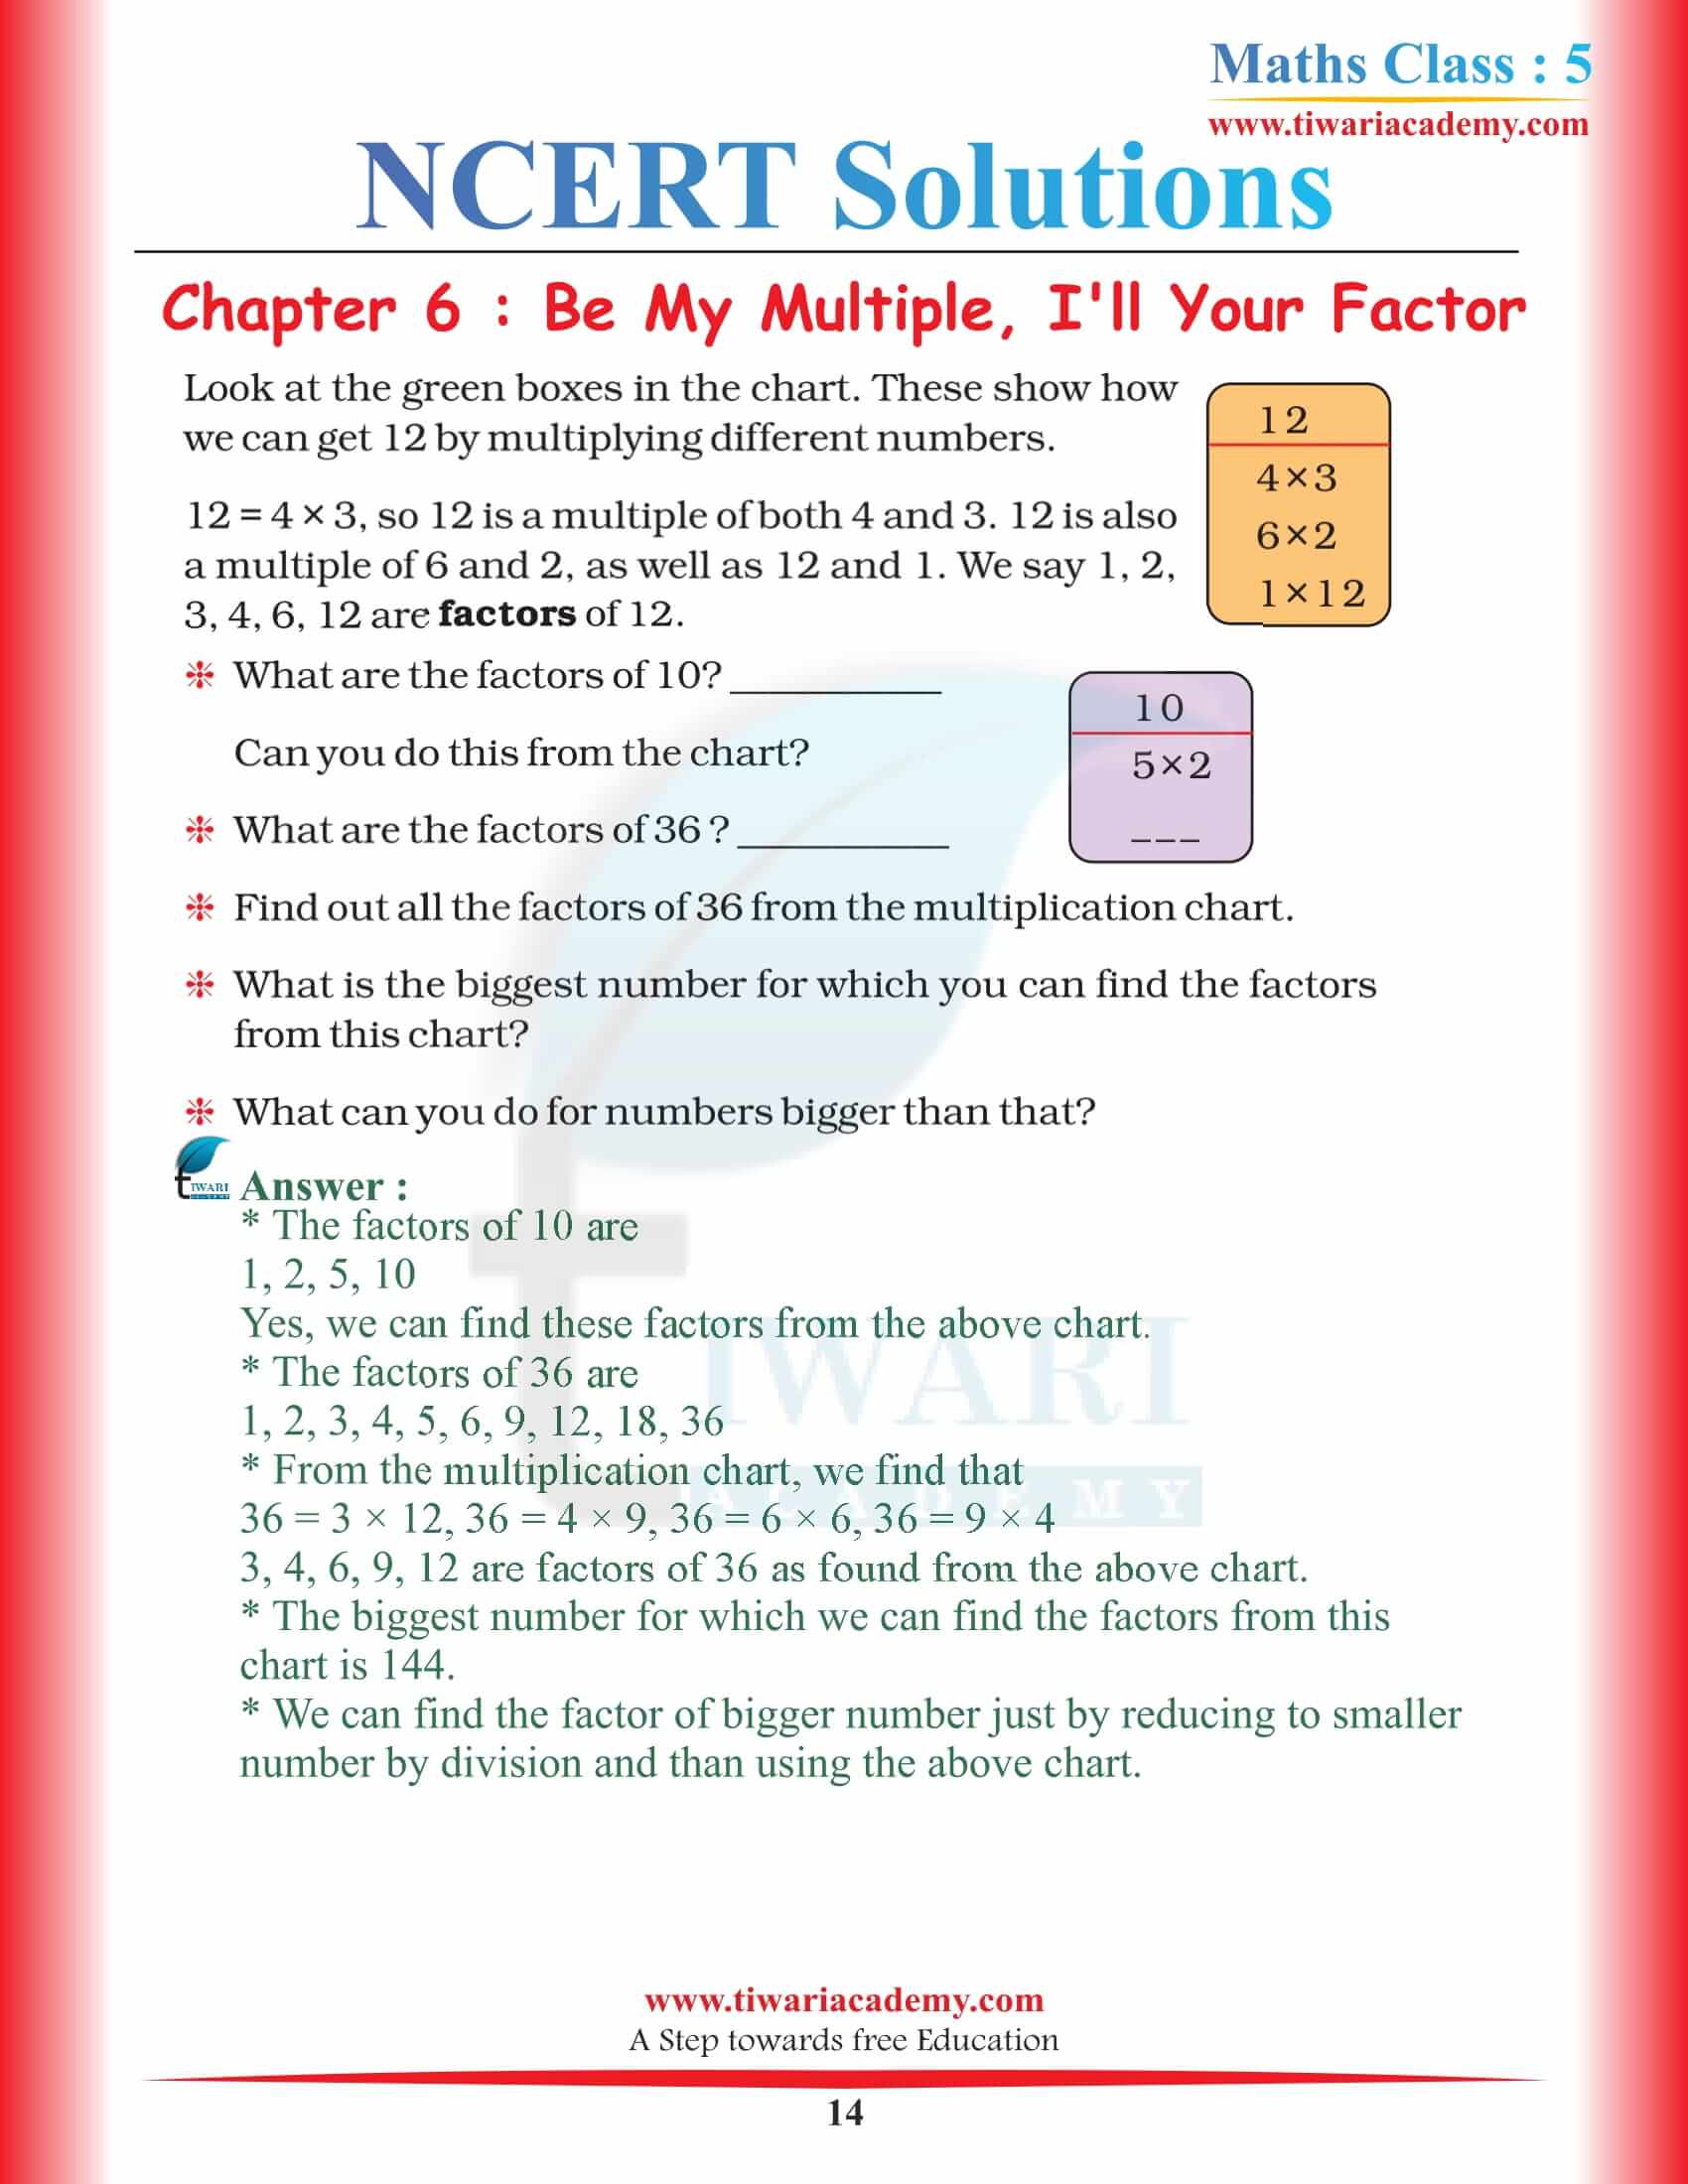 Class 5 Maths Chapter 6 Solutions in English Medium